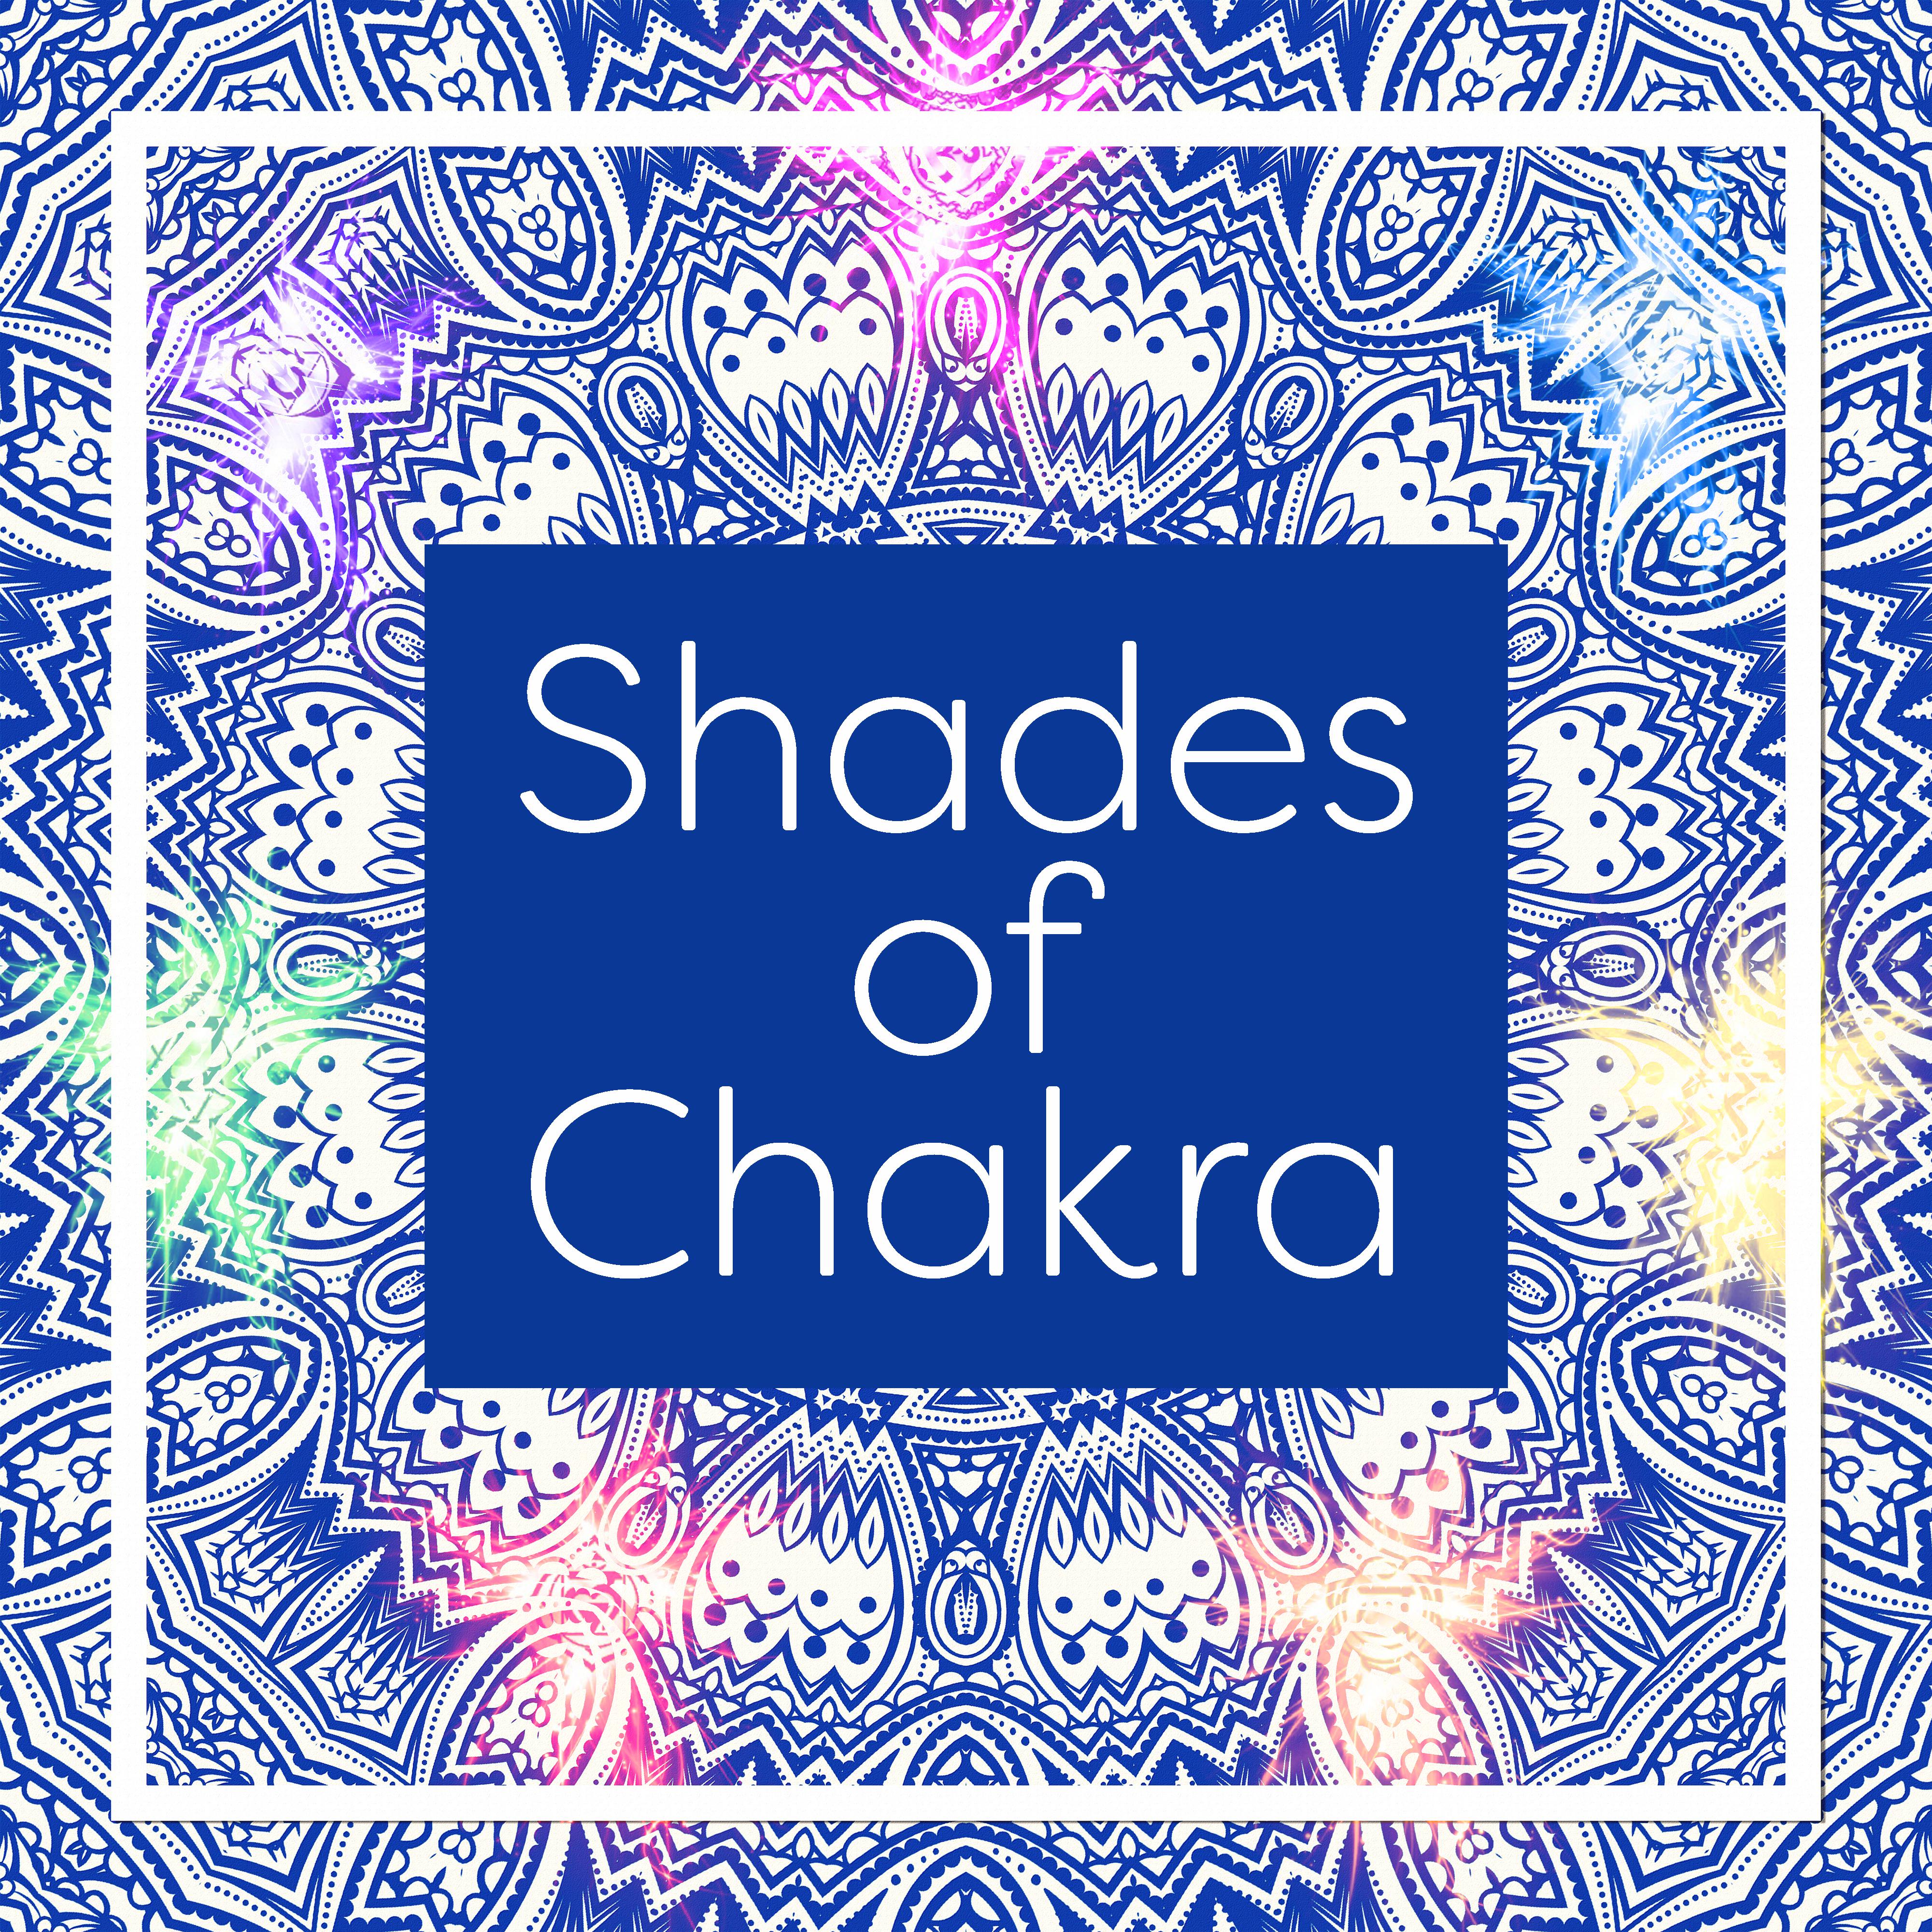 Shades of Chakra – Sounds of Yoga, Meditation Music, Inner Balance, Asian Zen, Relax, Pure Mind, Soothing Music for Yoga